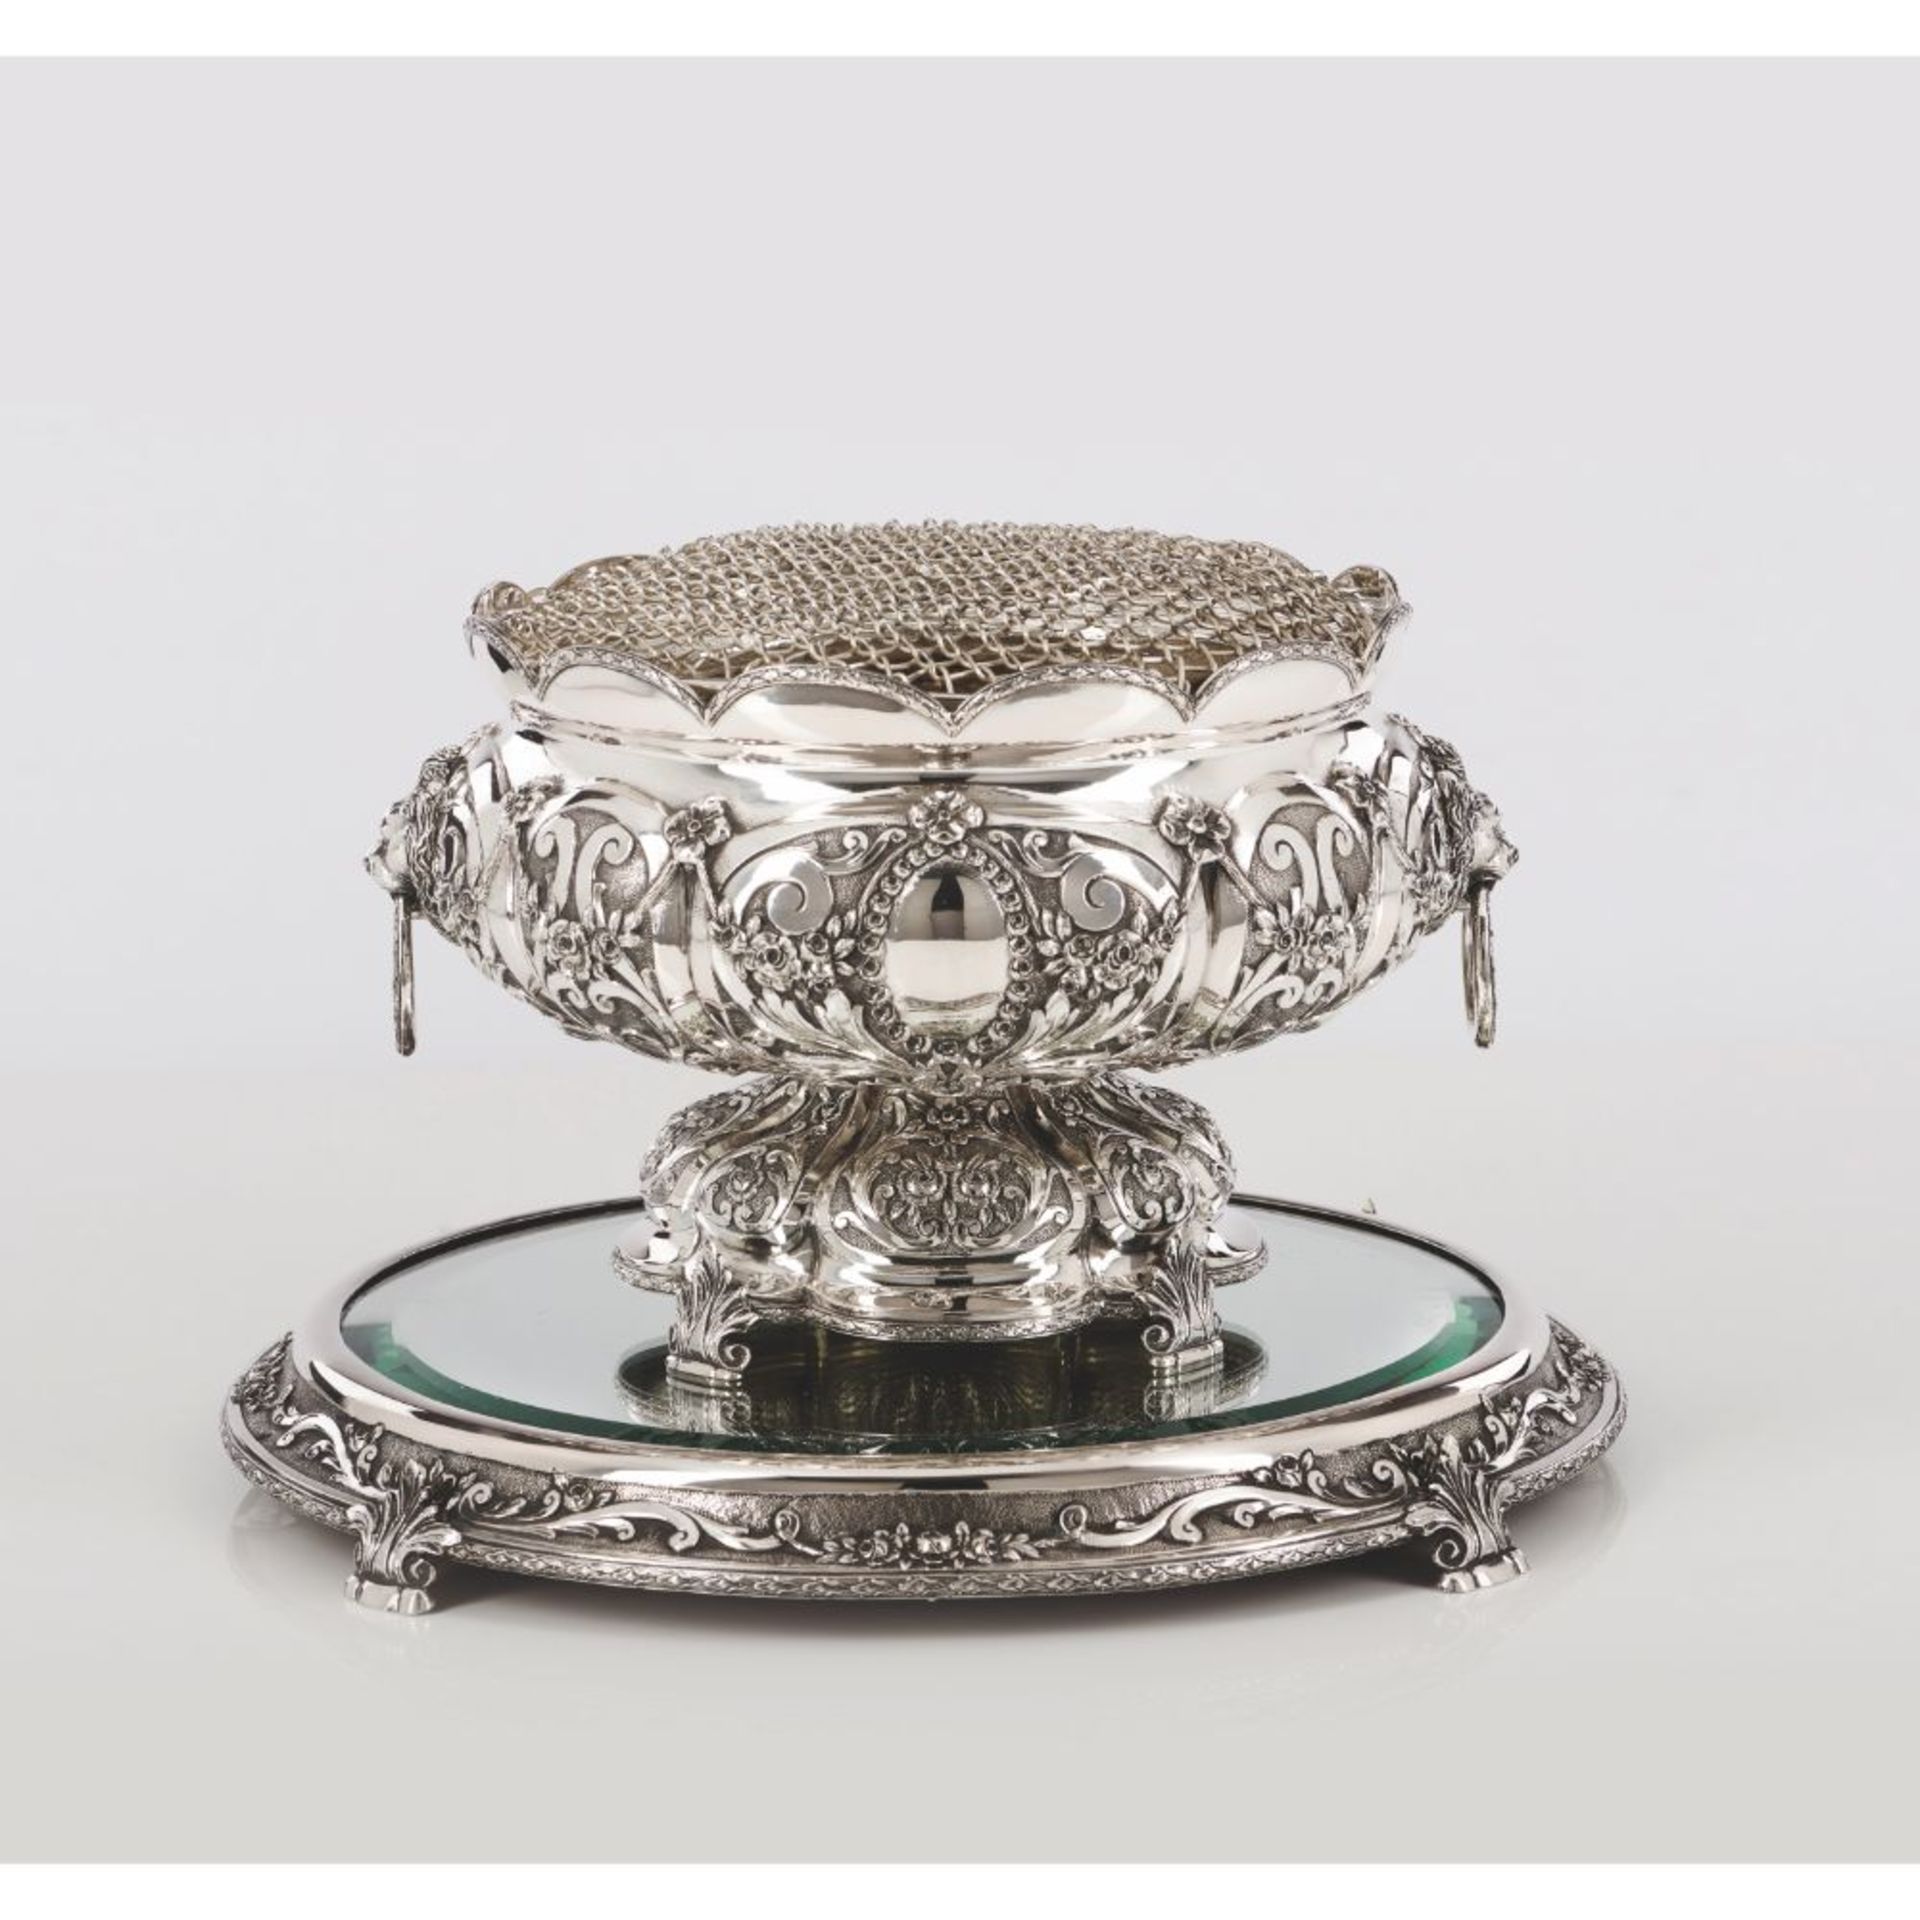 A centrepiece / flower holder, Silver 833/000, Gadrooned and reliefs decoration with lion heads